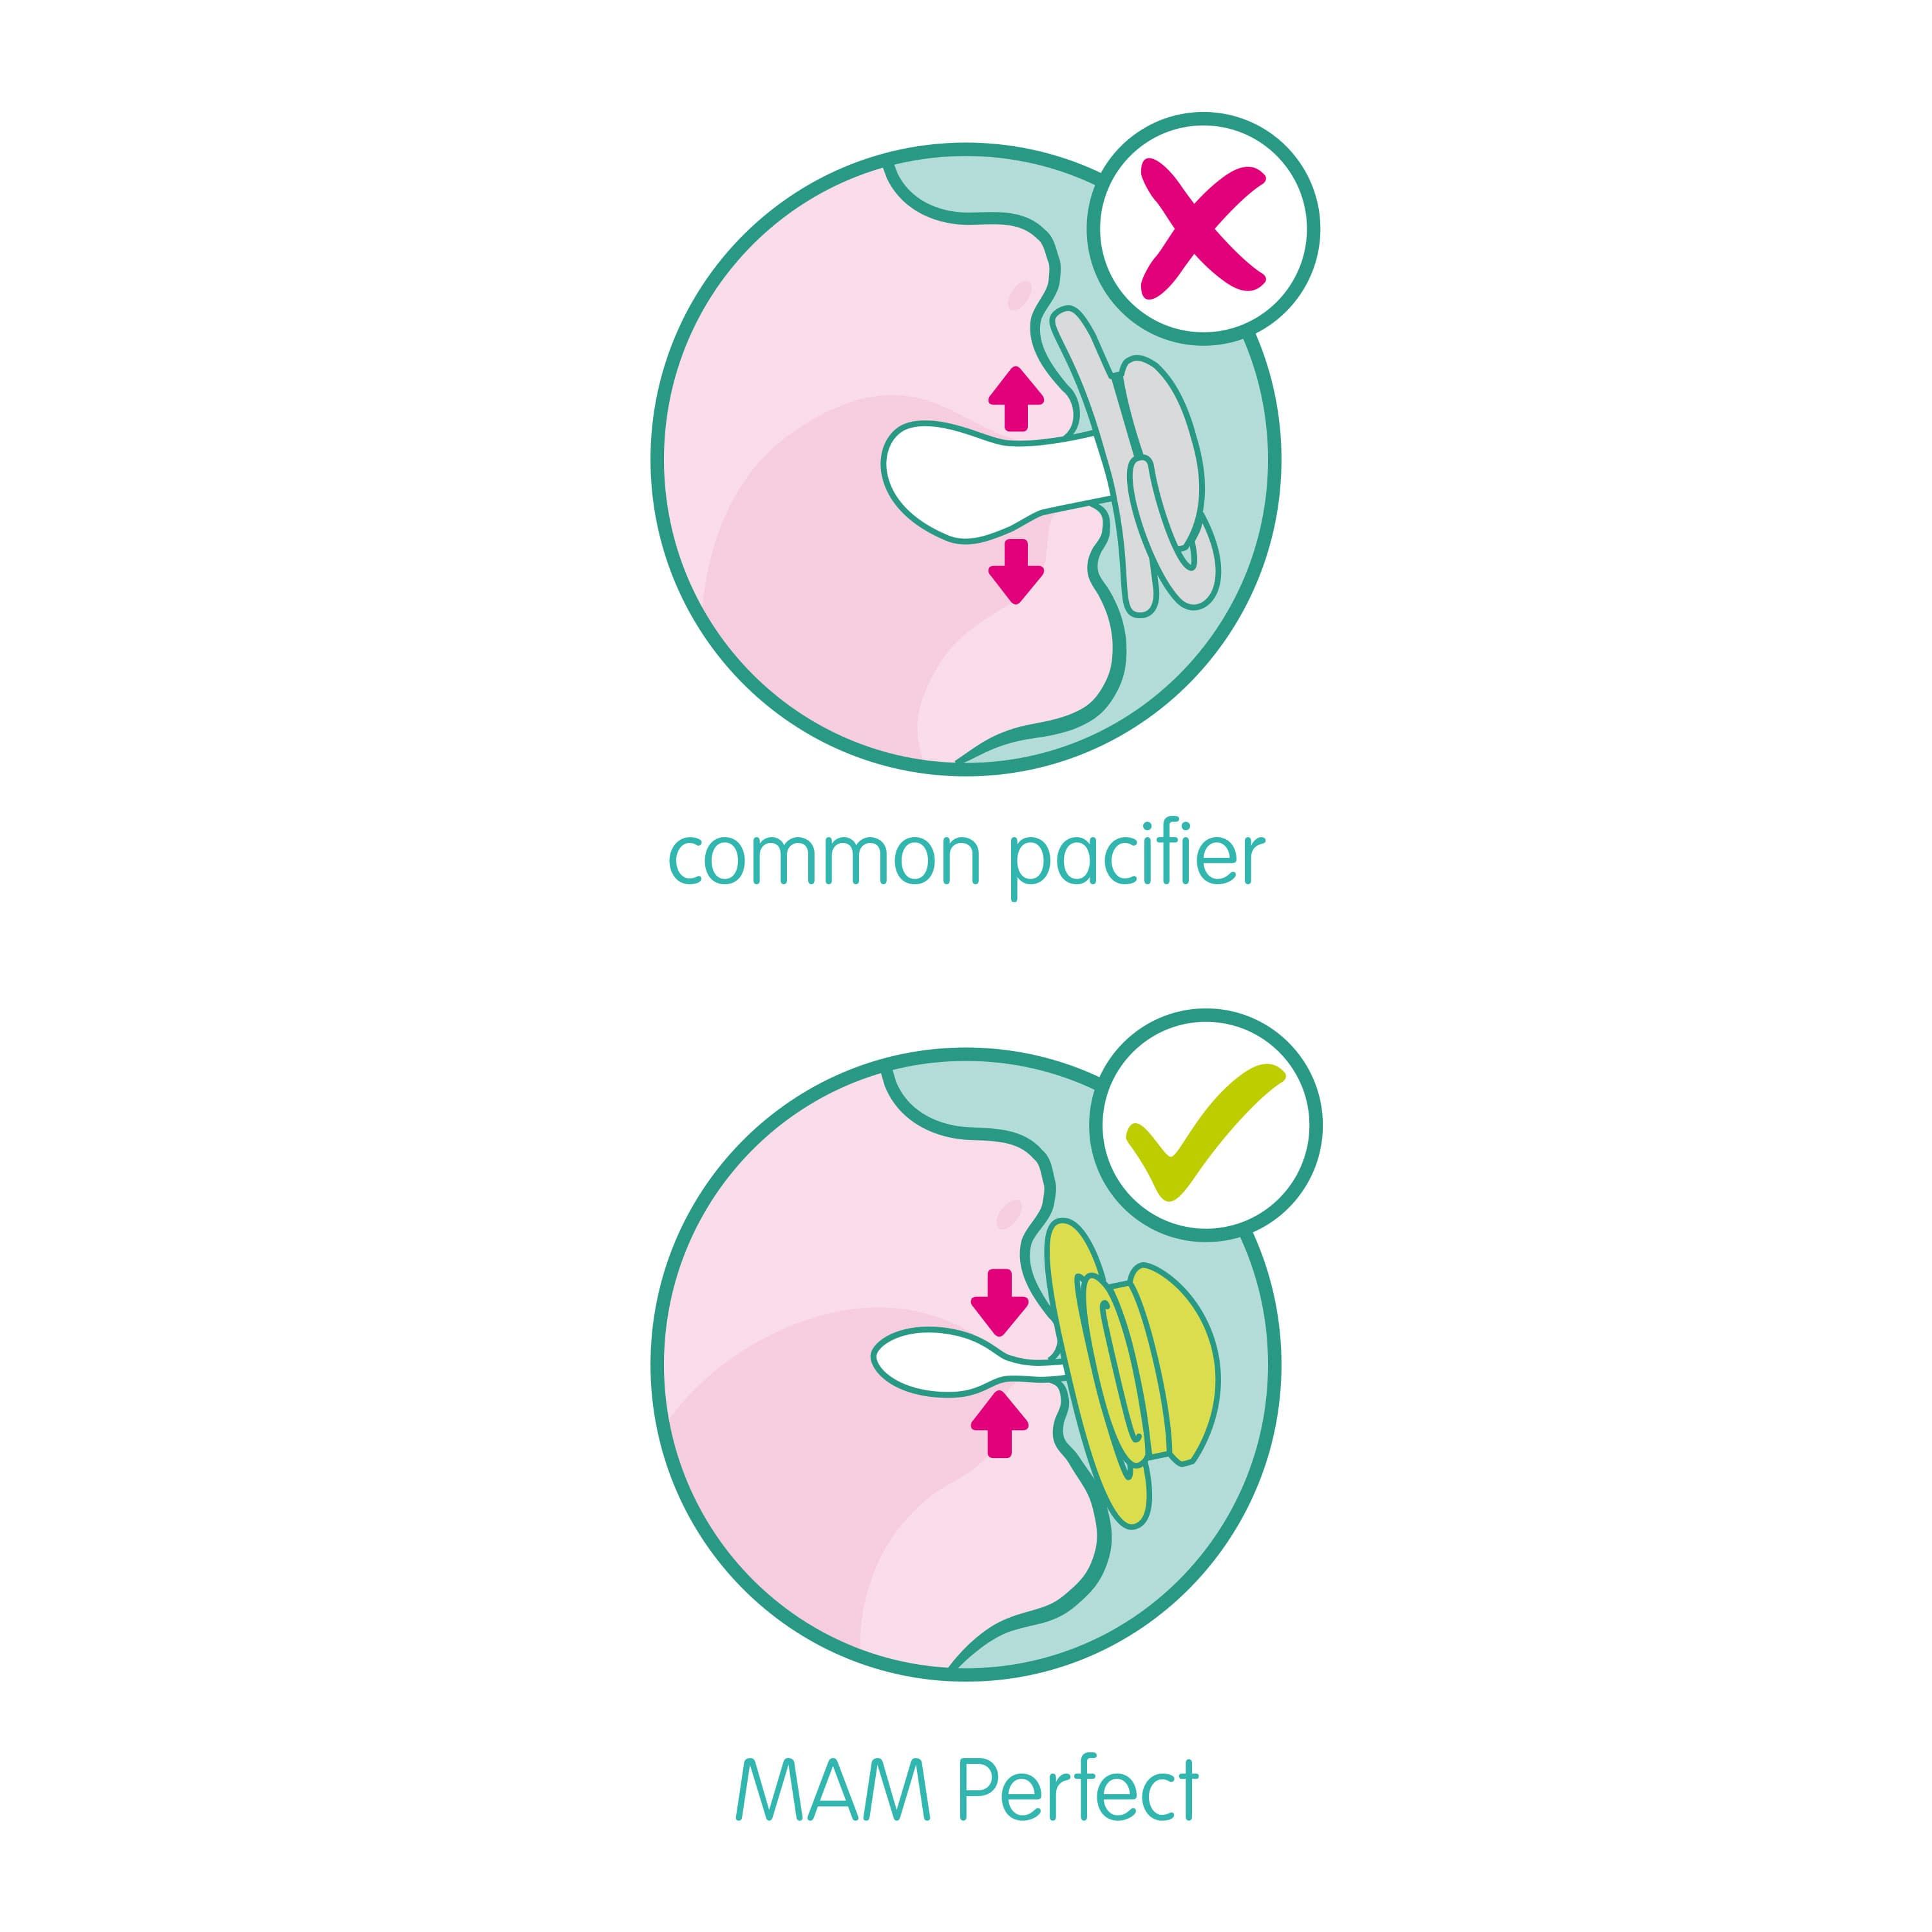 MAM Perfect Pacifier - Designed to reduce the risk of misaligned teeth